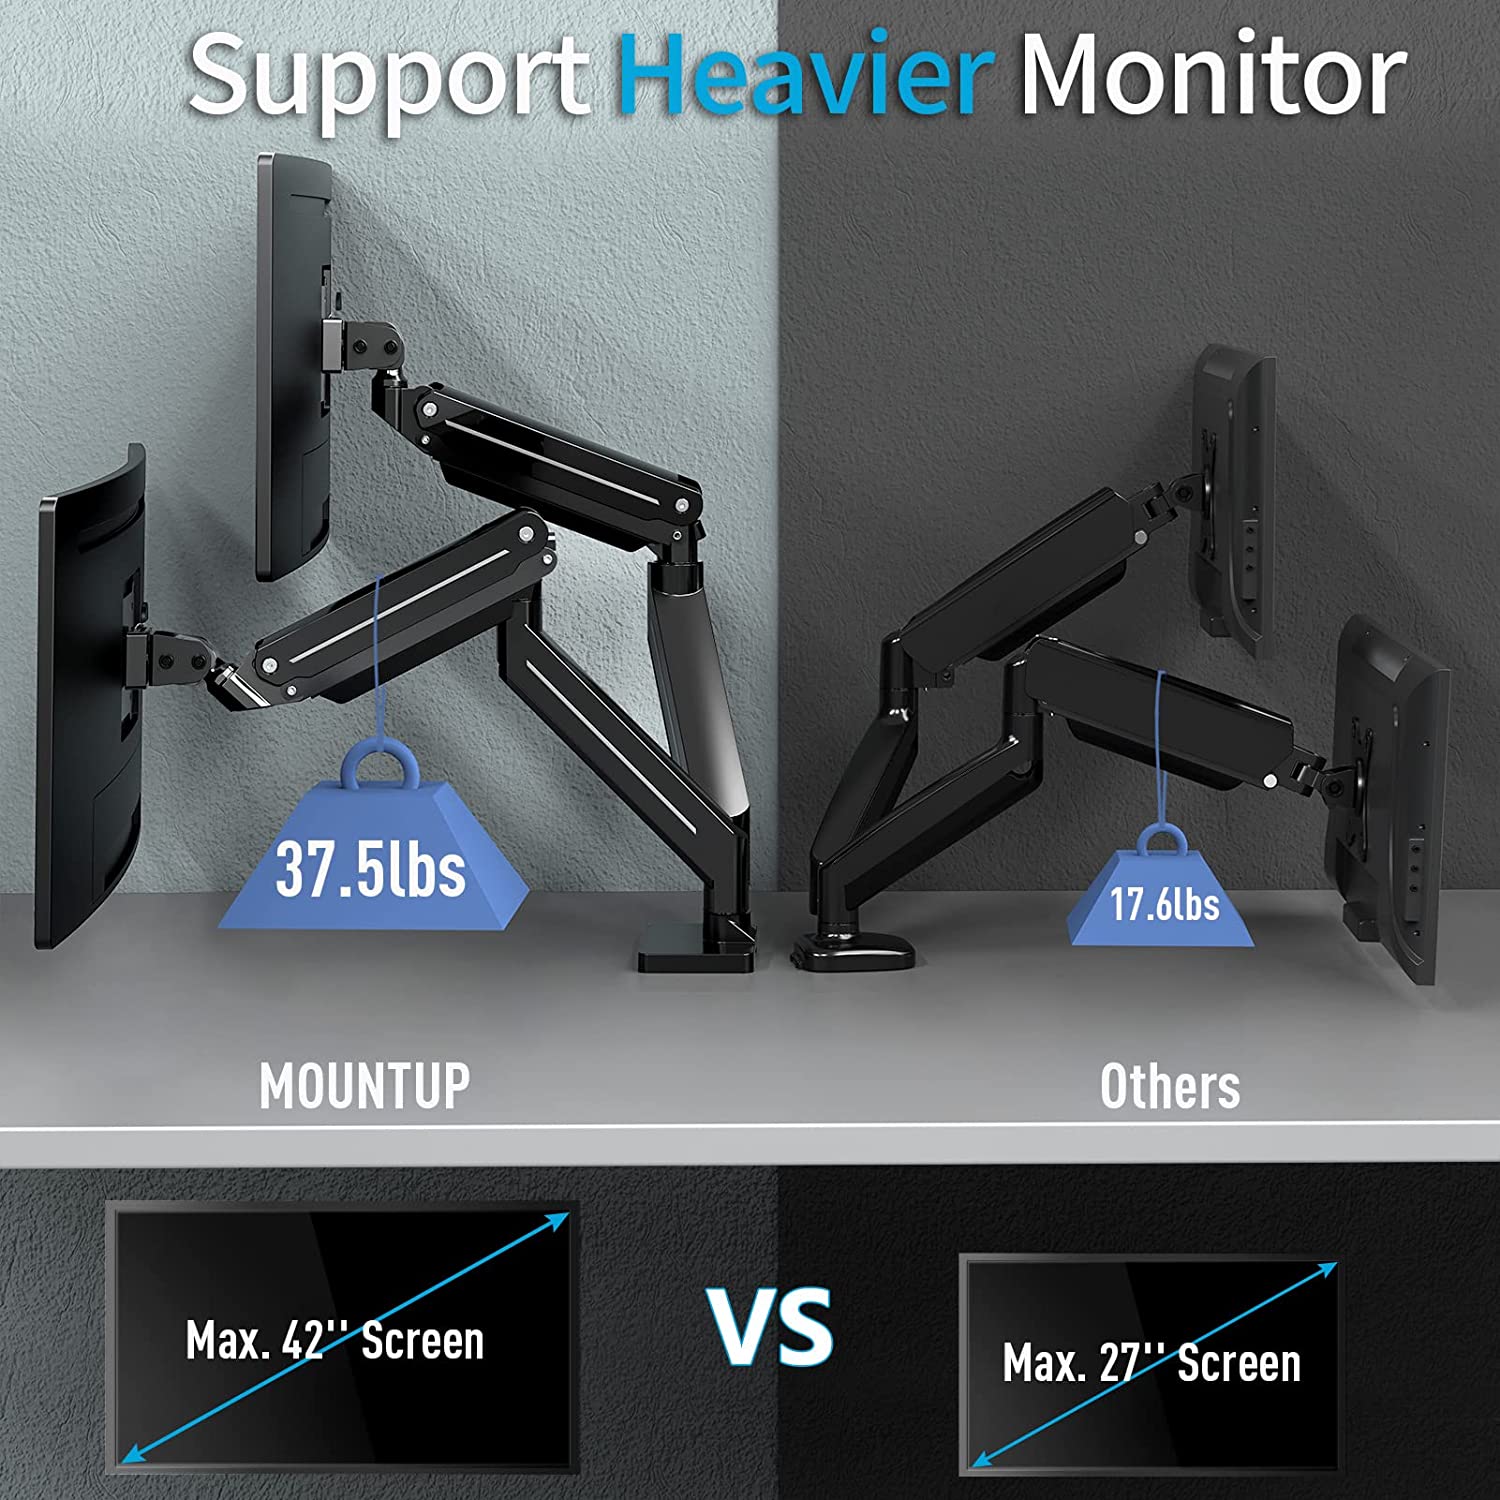 dual monitor mount supports heavier monitor up to 37.5 lbs.